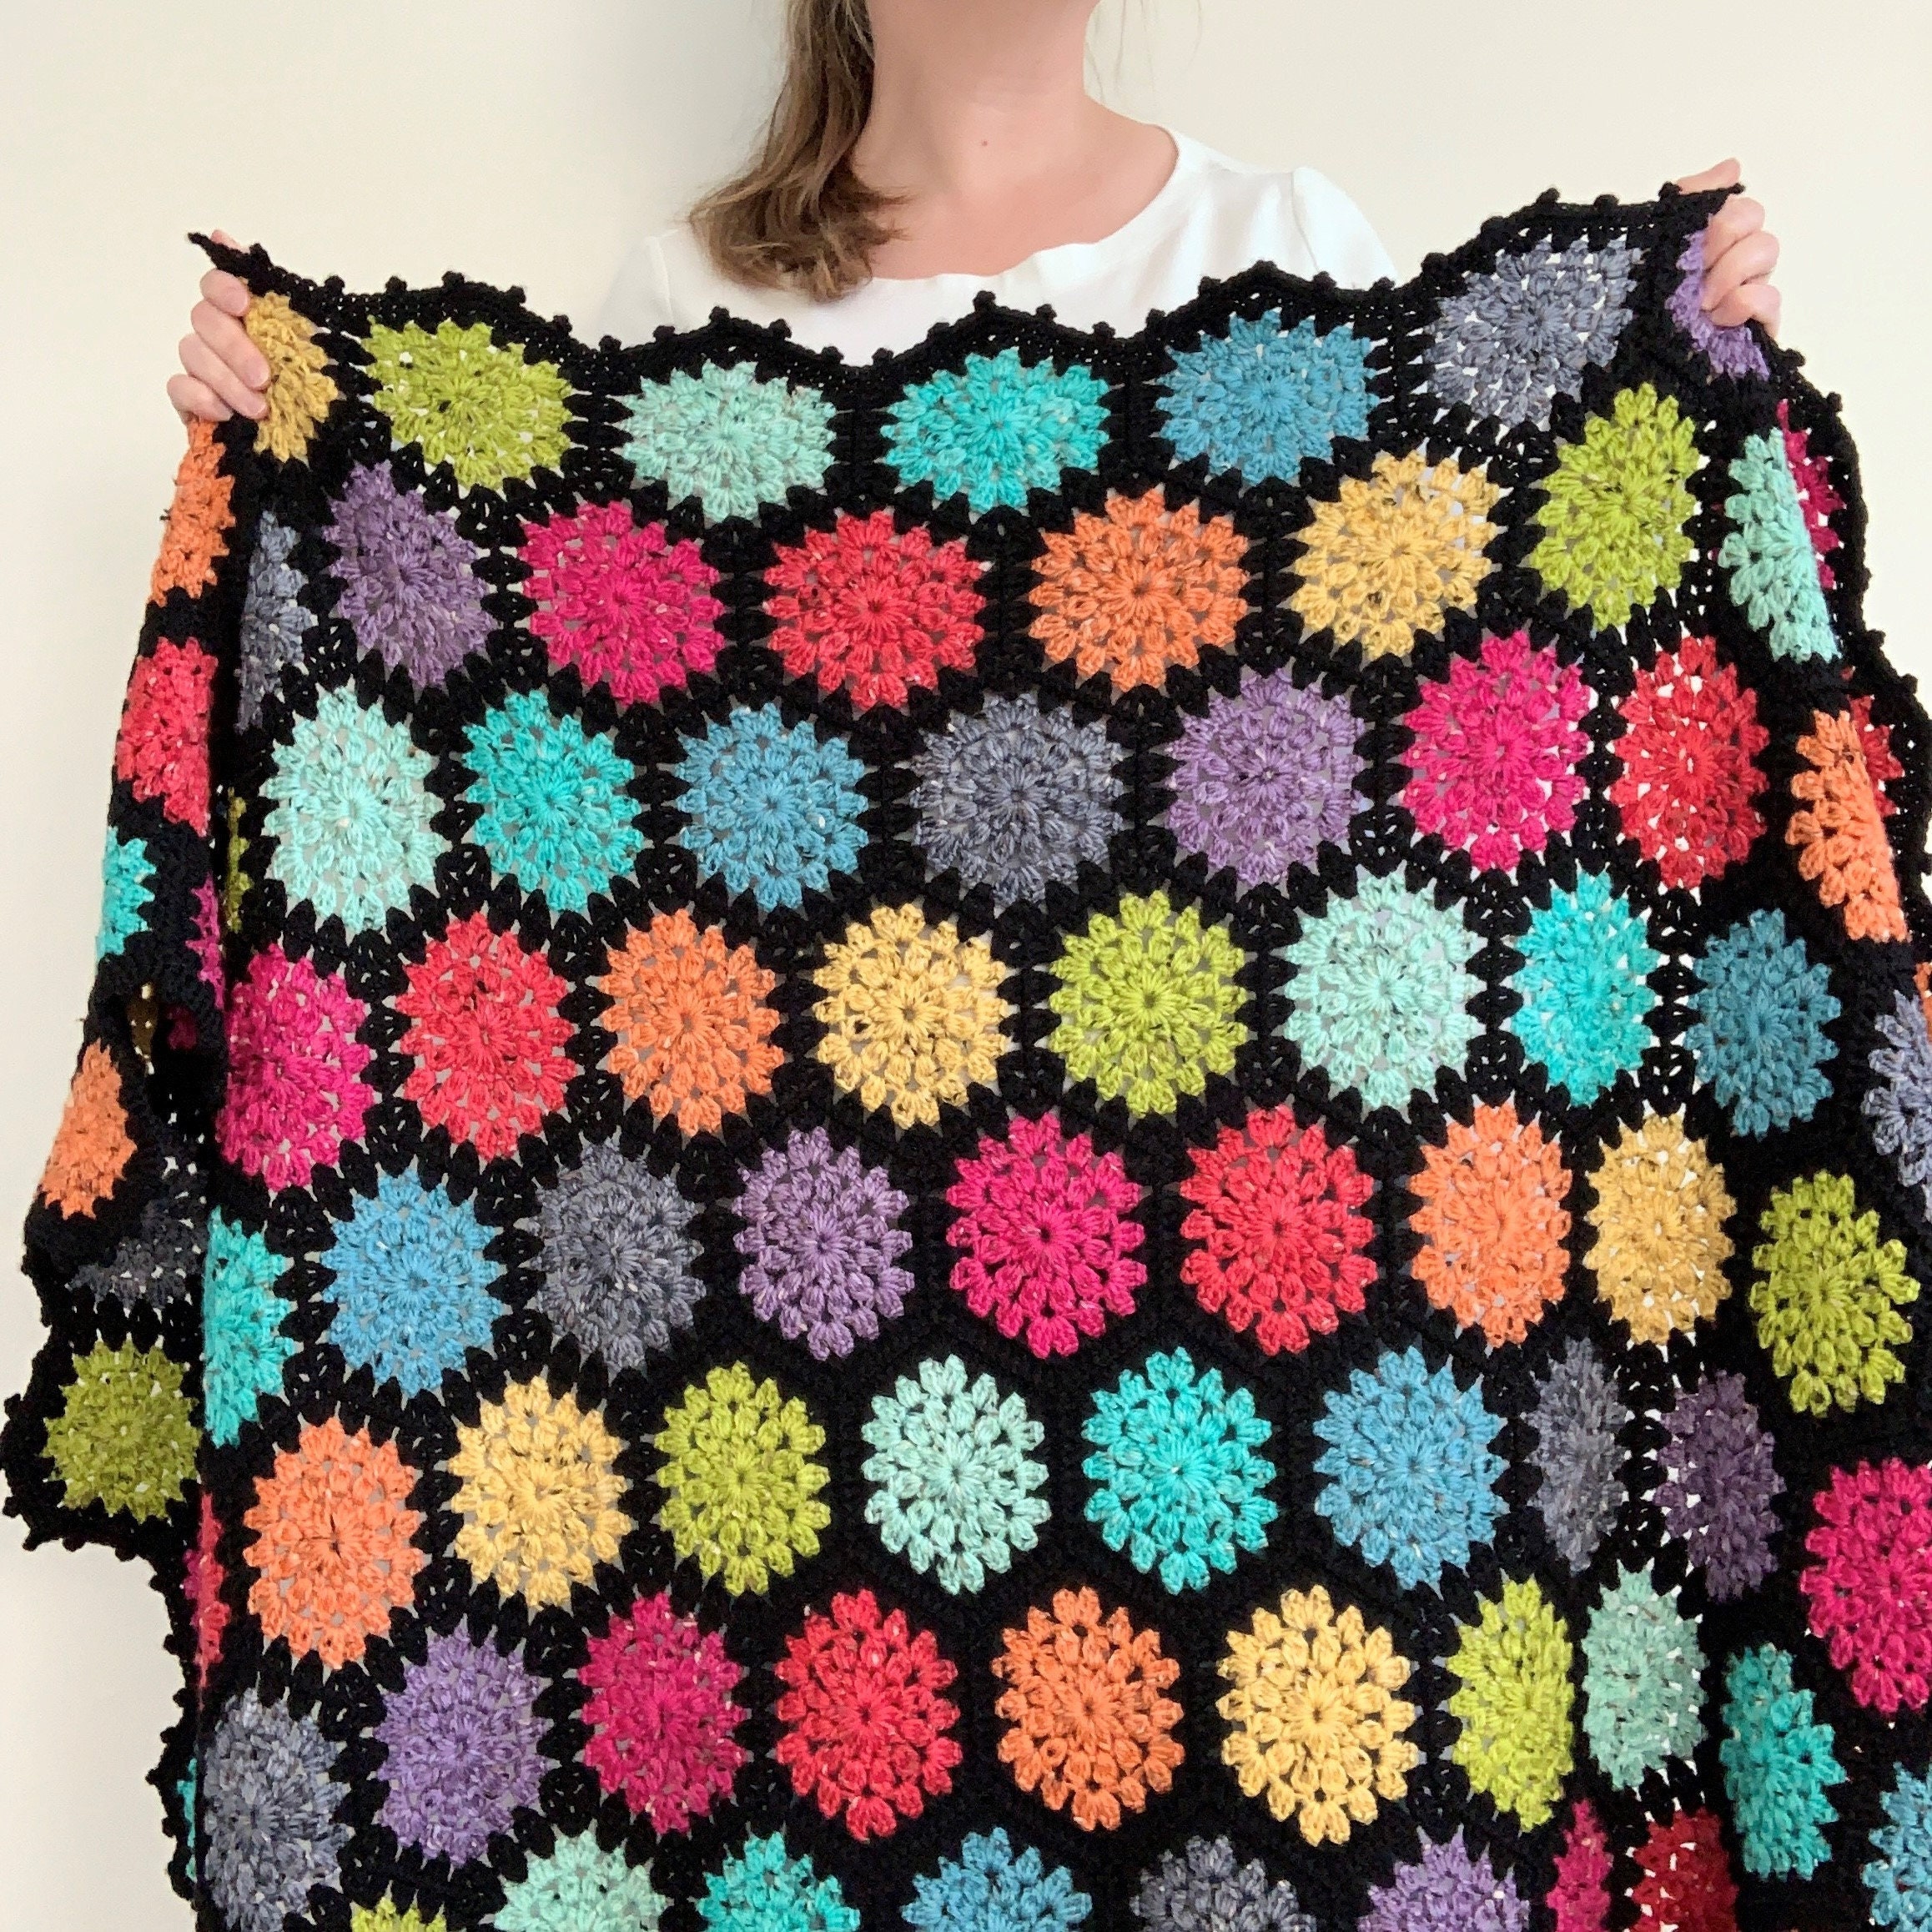 Ravelry: Circus Infinity Granny Square Baby Blanket pattern by Debi Park